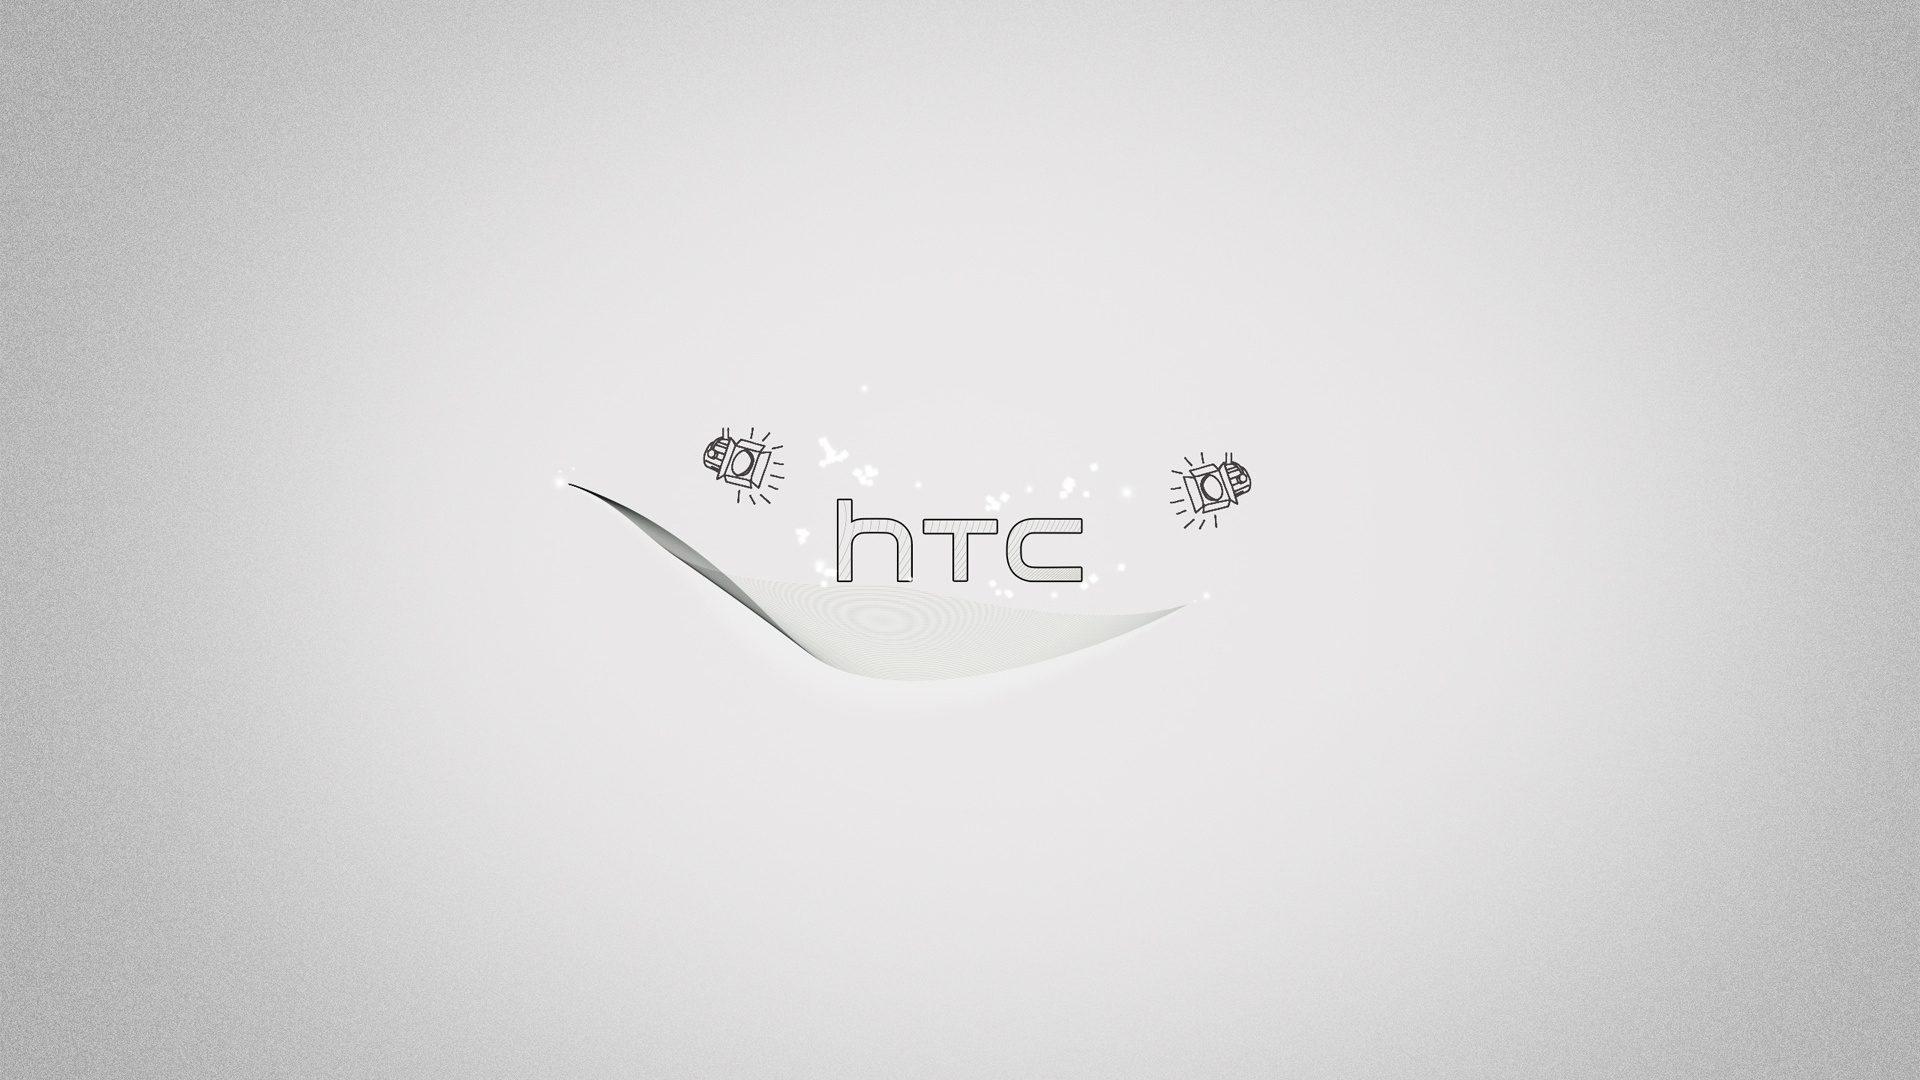 Cool HTC Logo for 1920 x 1080 HDTV 1080p resolution